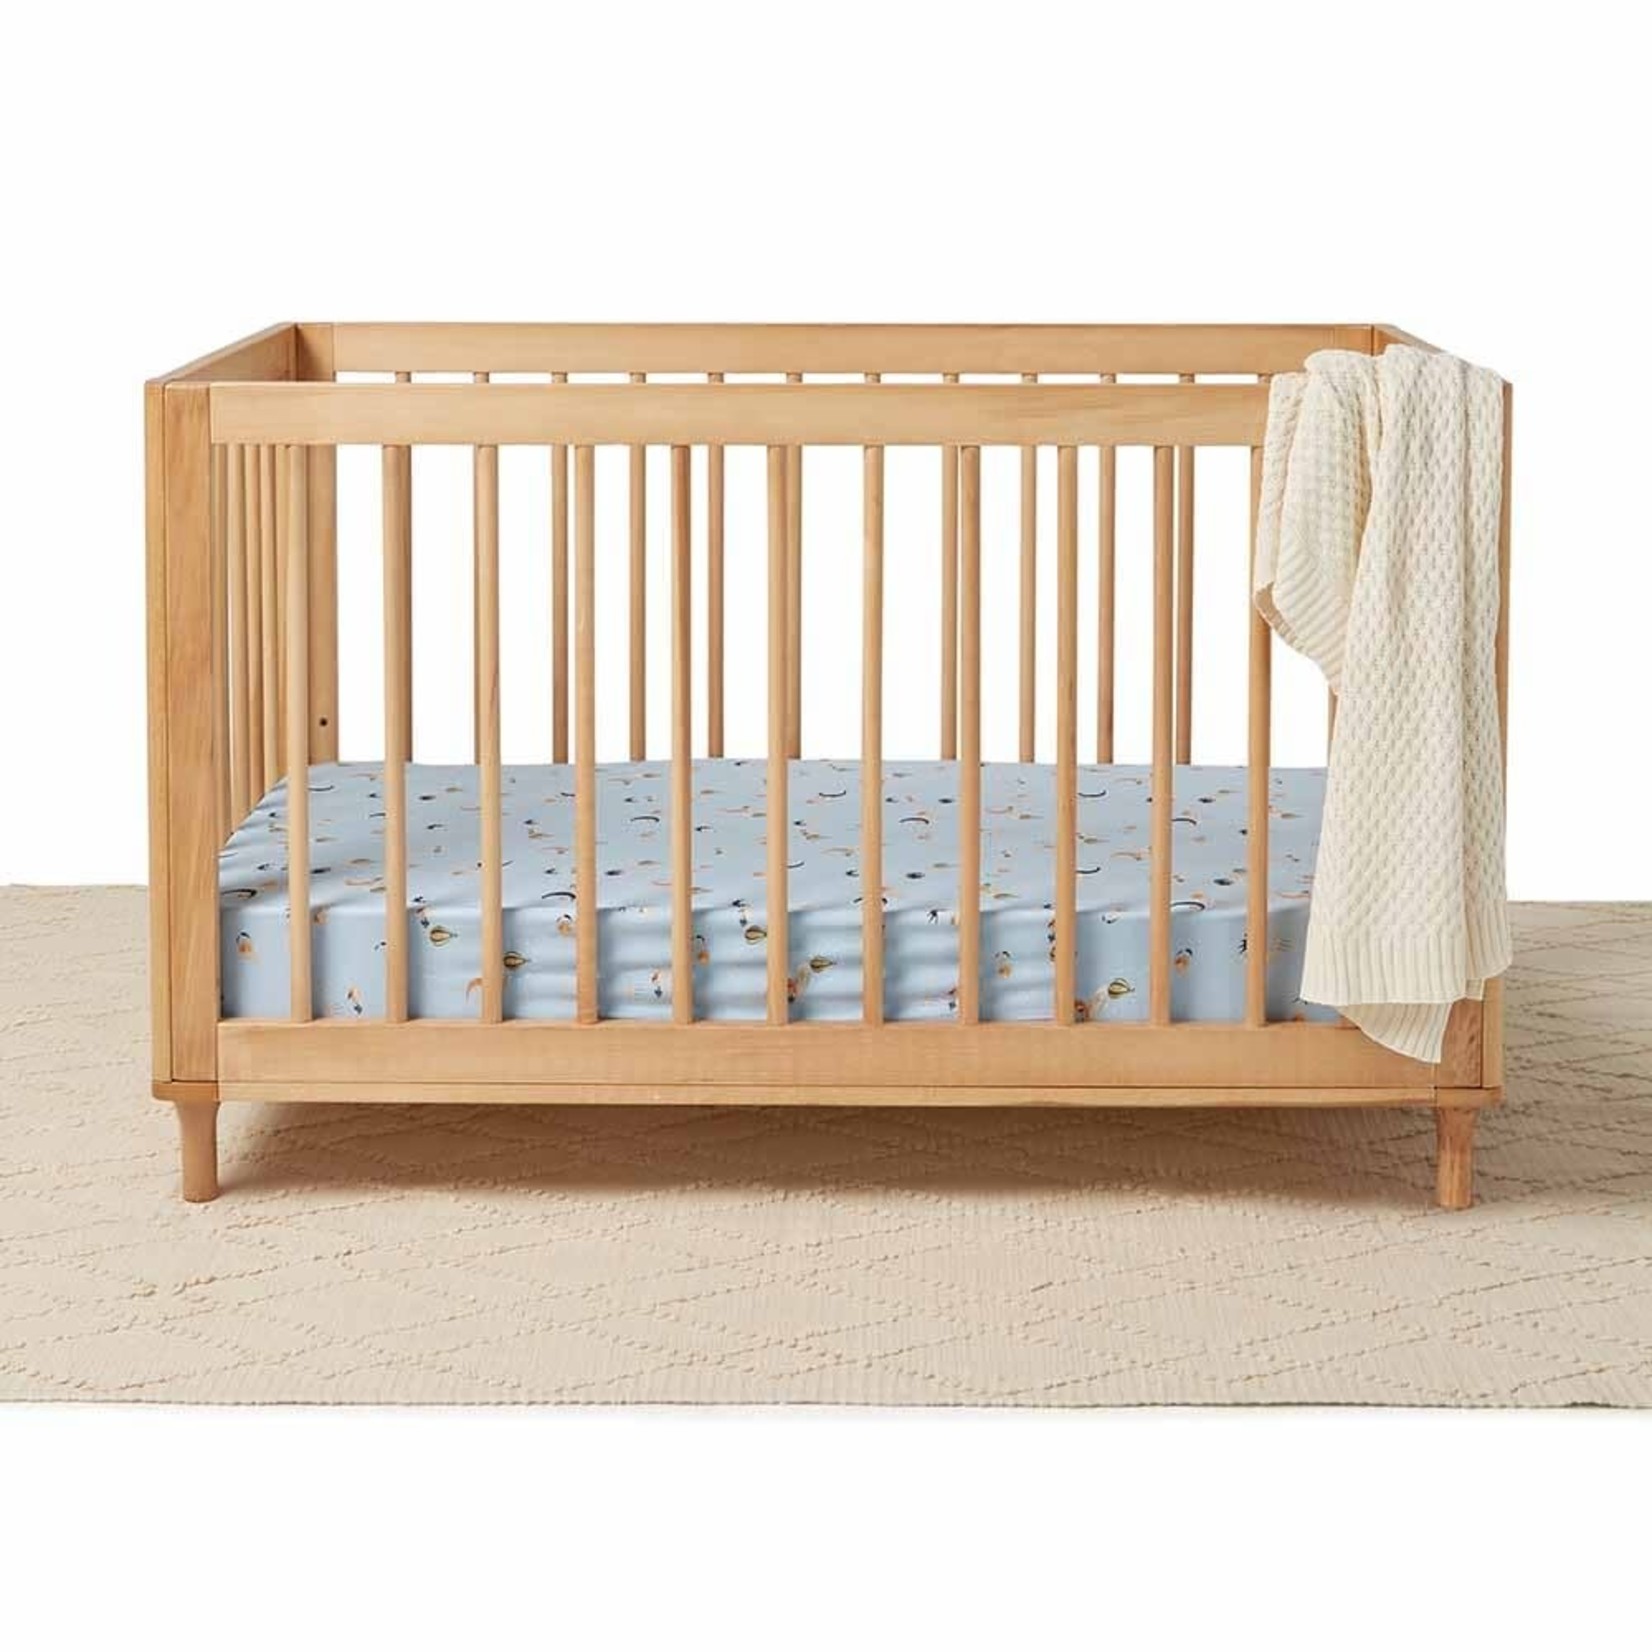 Snuggle Hunny Fitted Cot Sheet-Dream